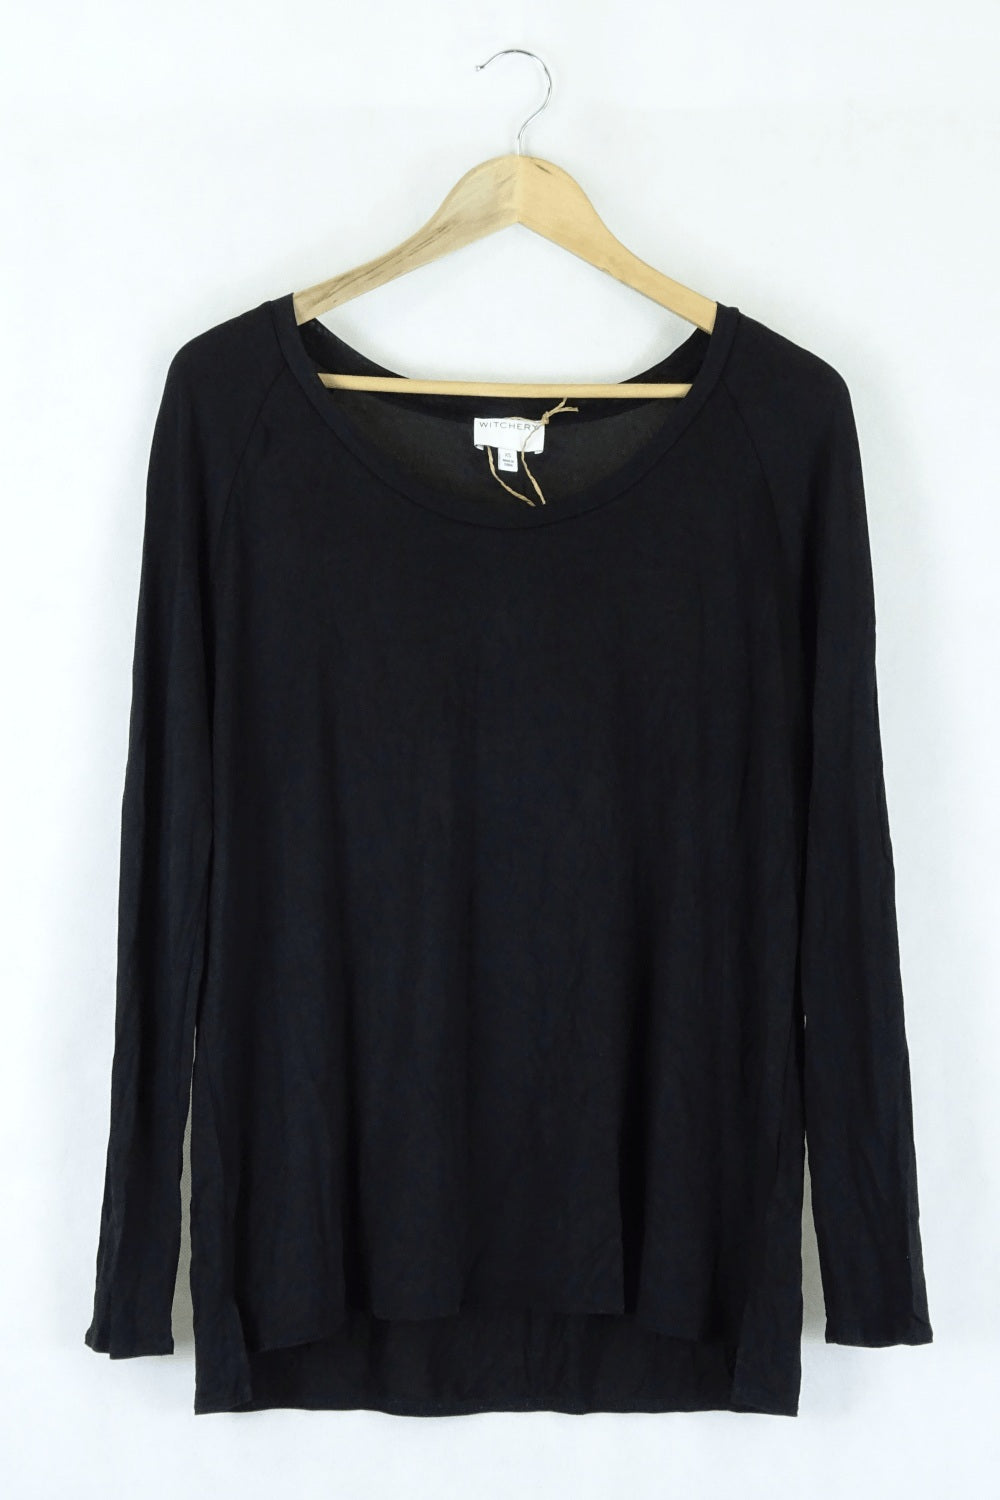 Witchery Black Long Sleeve Top Xs